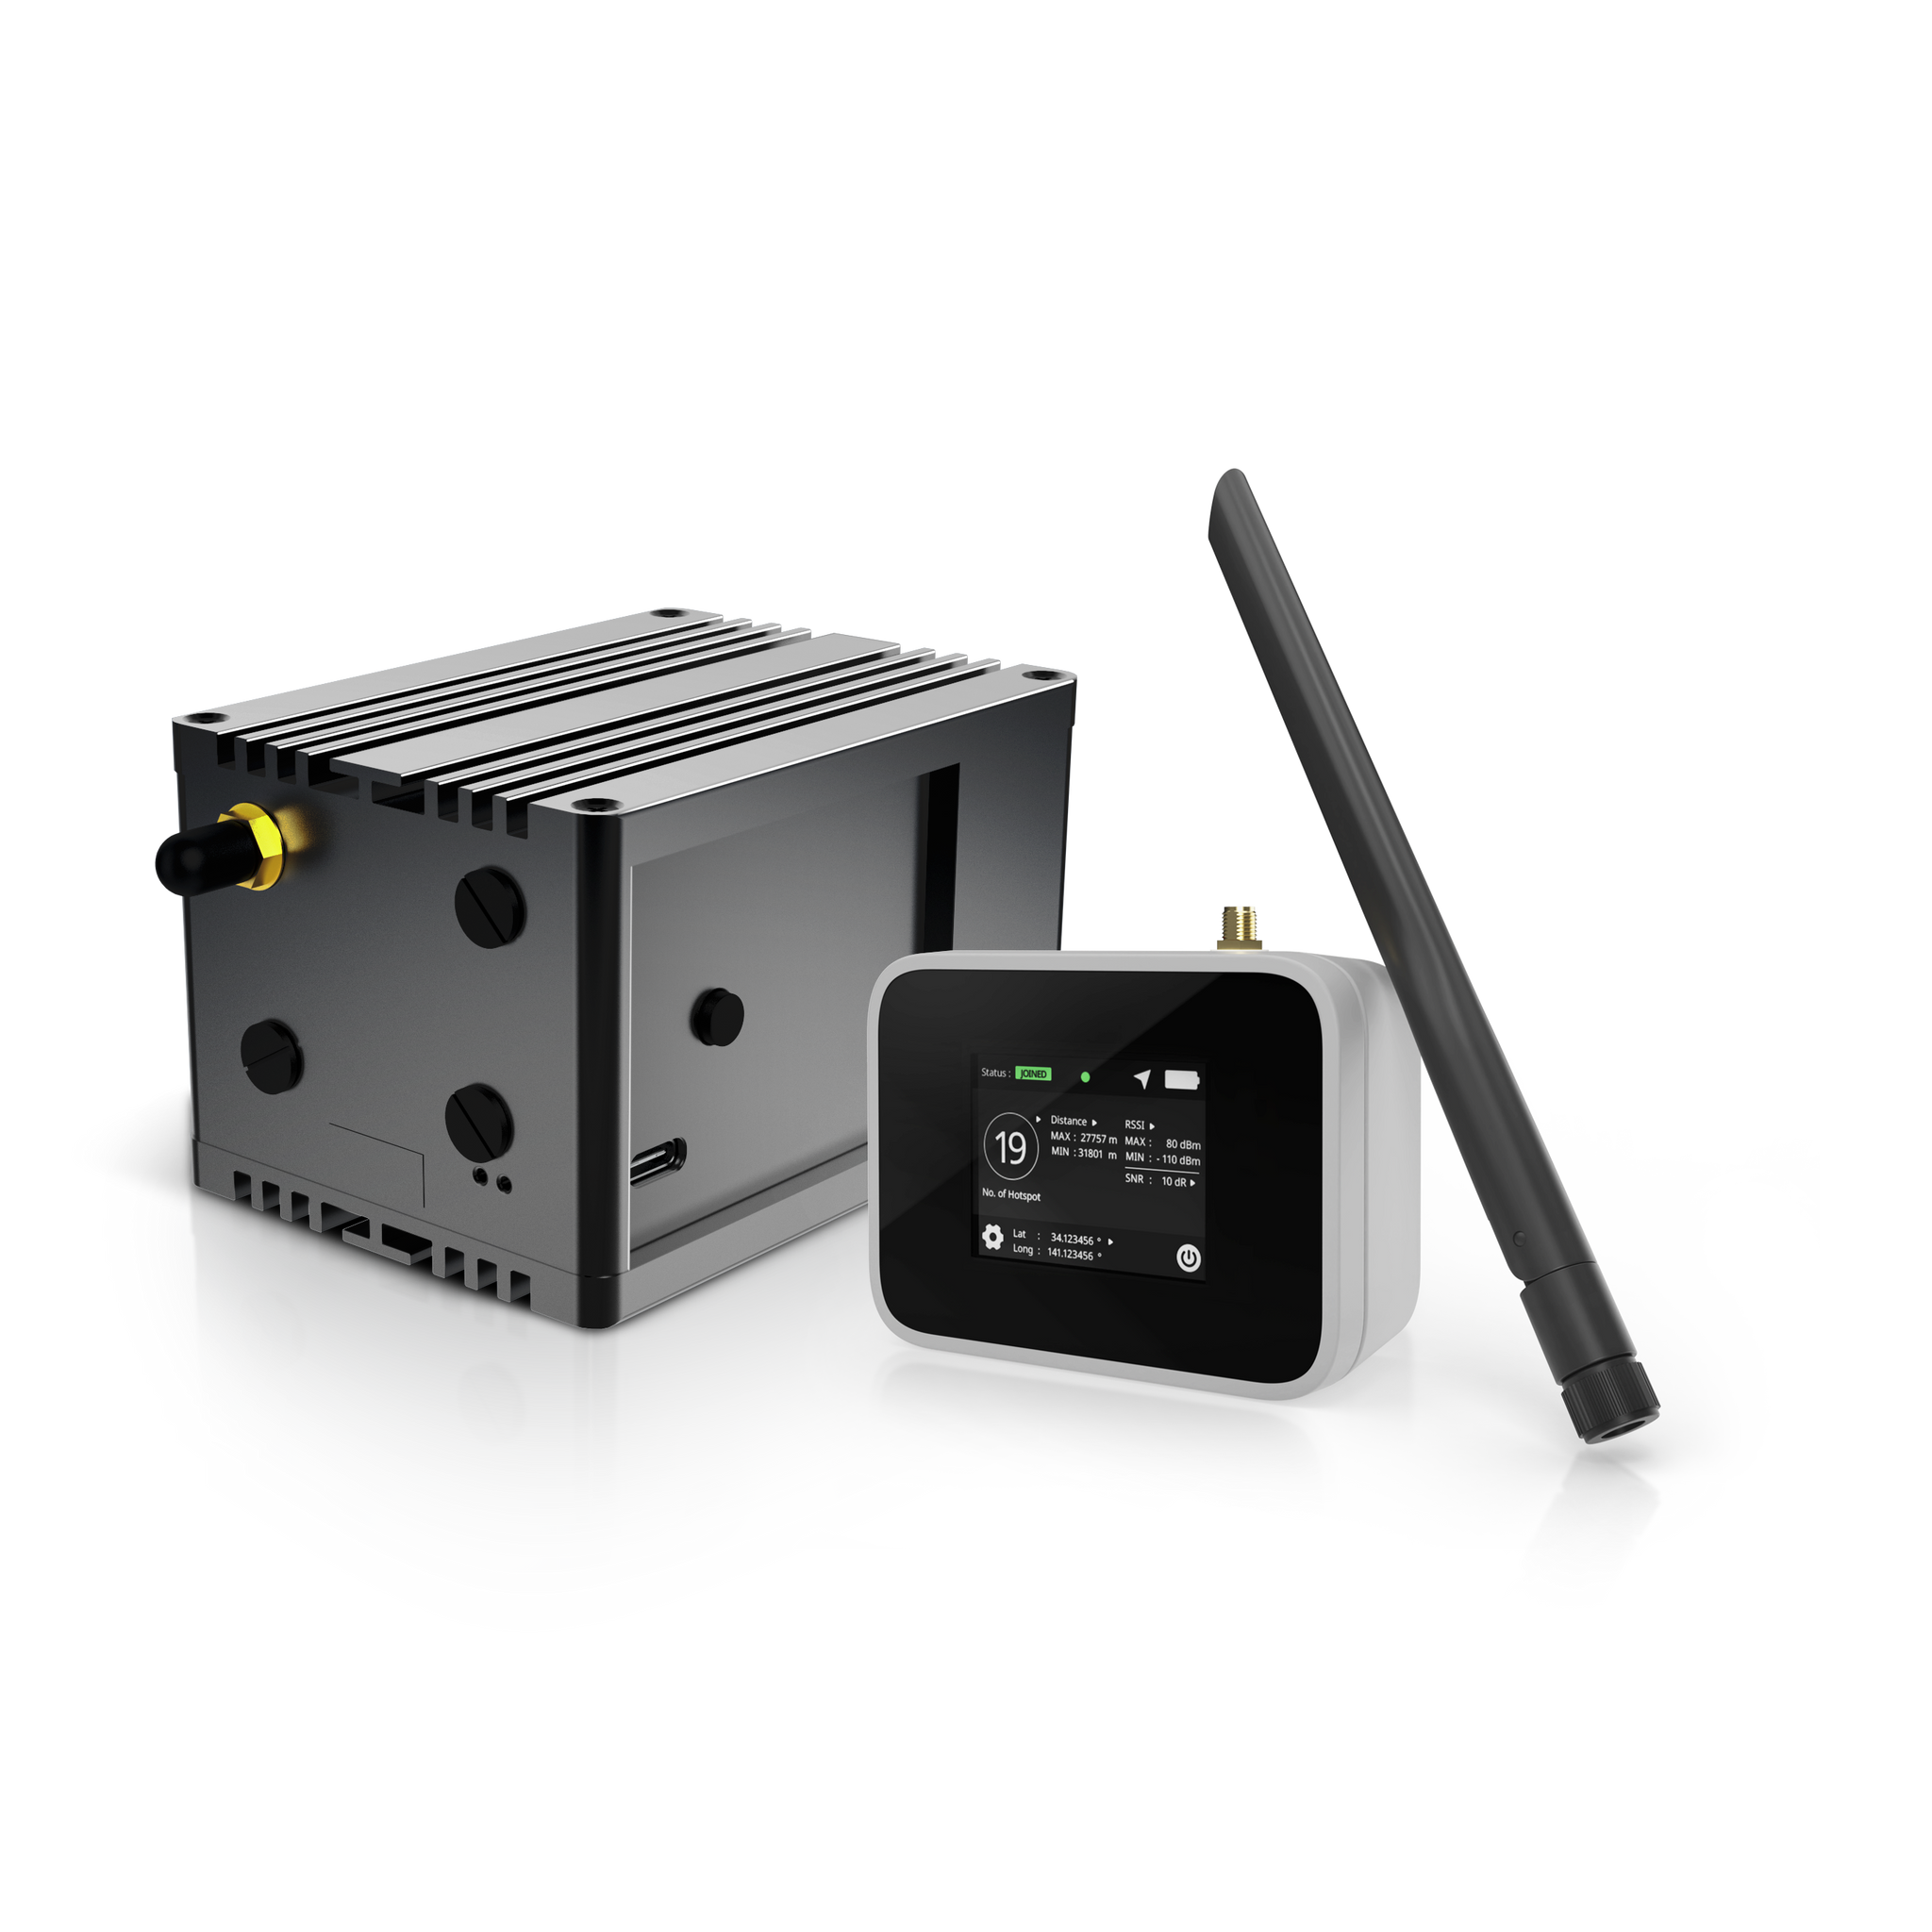 Discover the Benefits of the RAK Hotspot V2 and RAK10701 Field Mapper Bundle | Maximize Your Helium Network Impact and Rewards